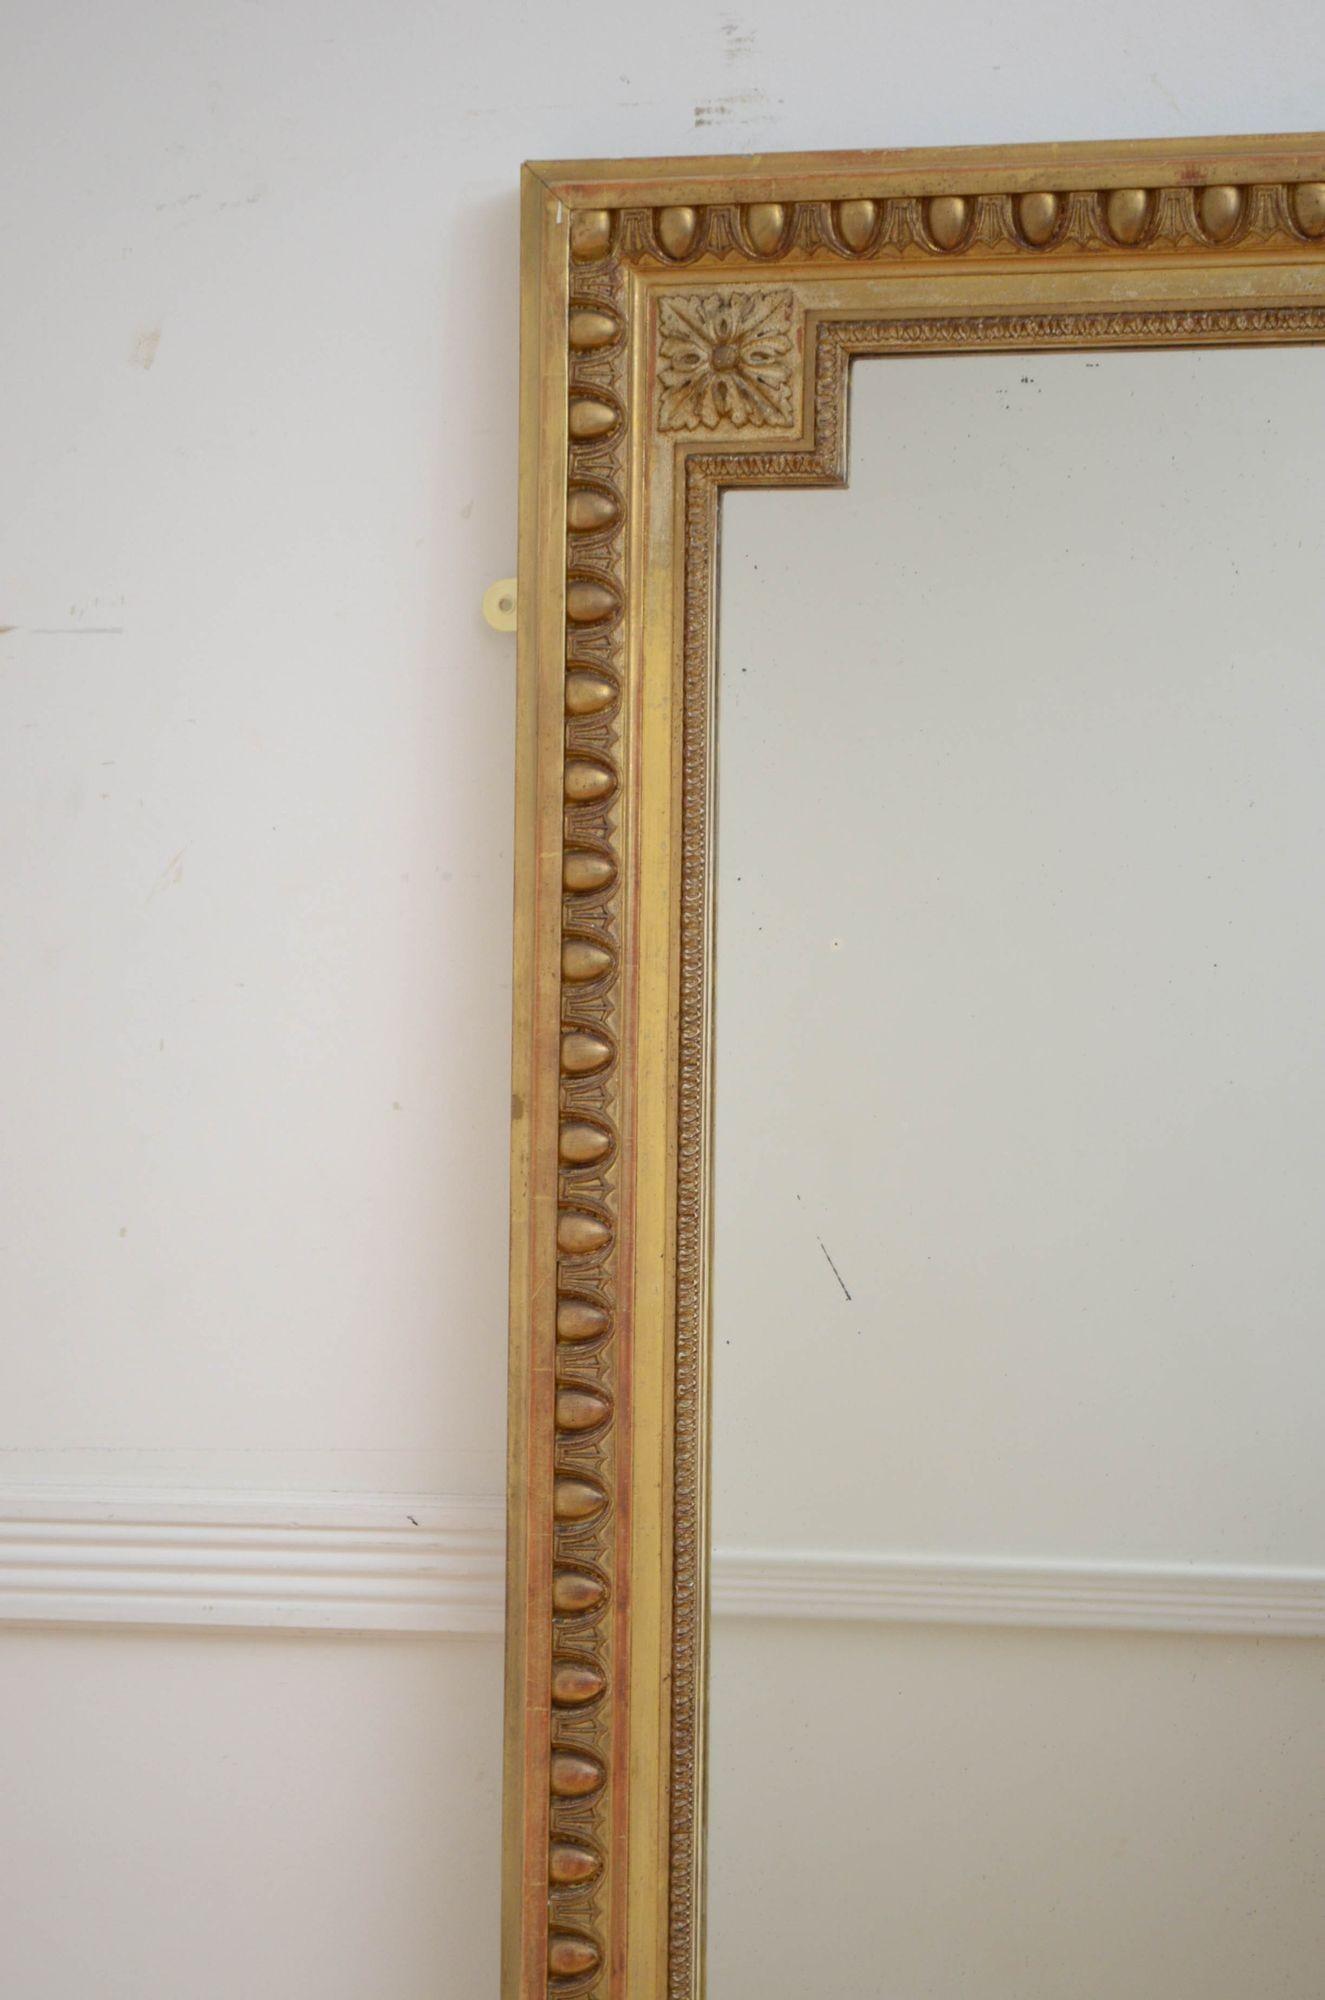 19th Century French Giltwood Wall Mirror